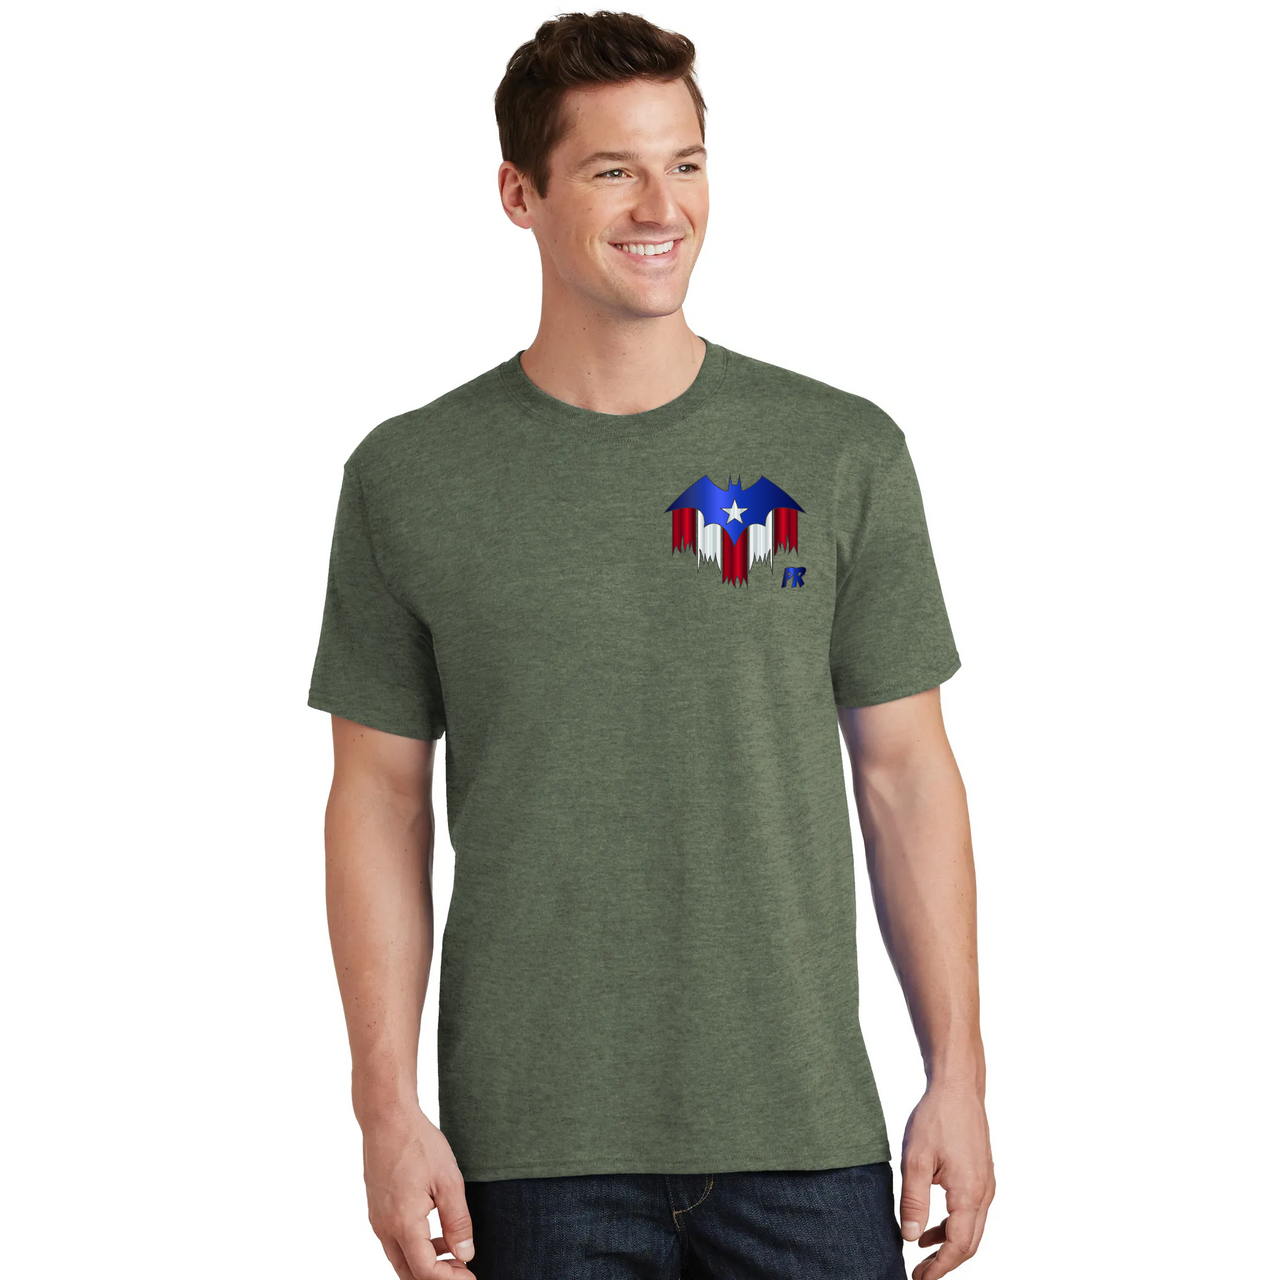 Puerto Rican Bat Man Front and Back Image Heather T-Shirt